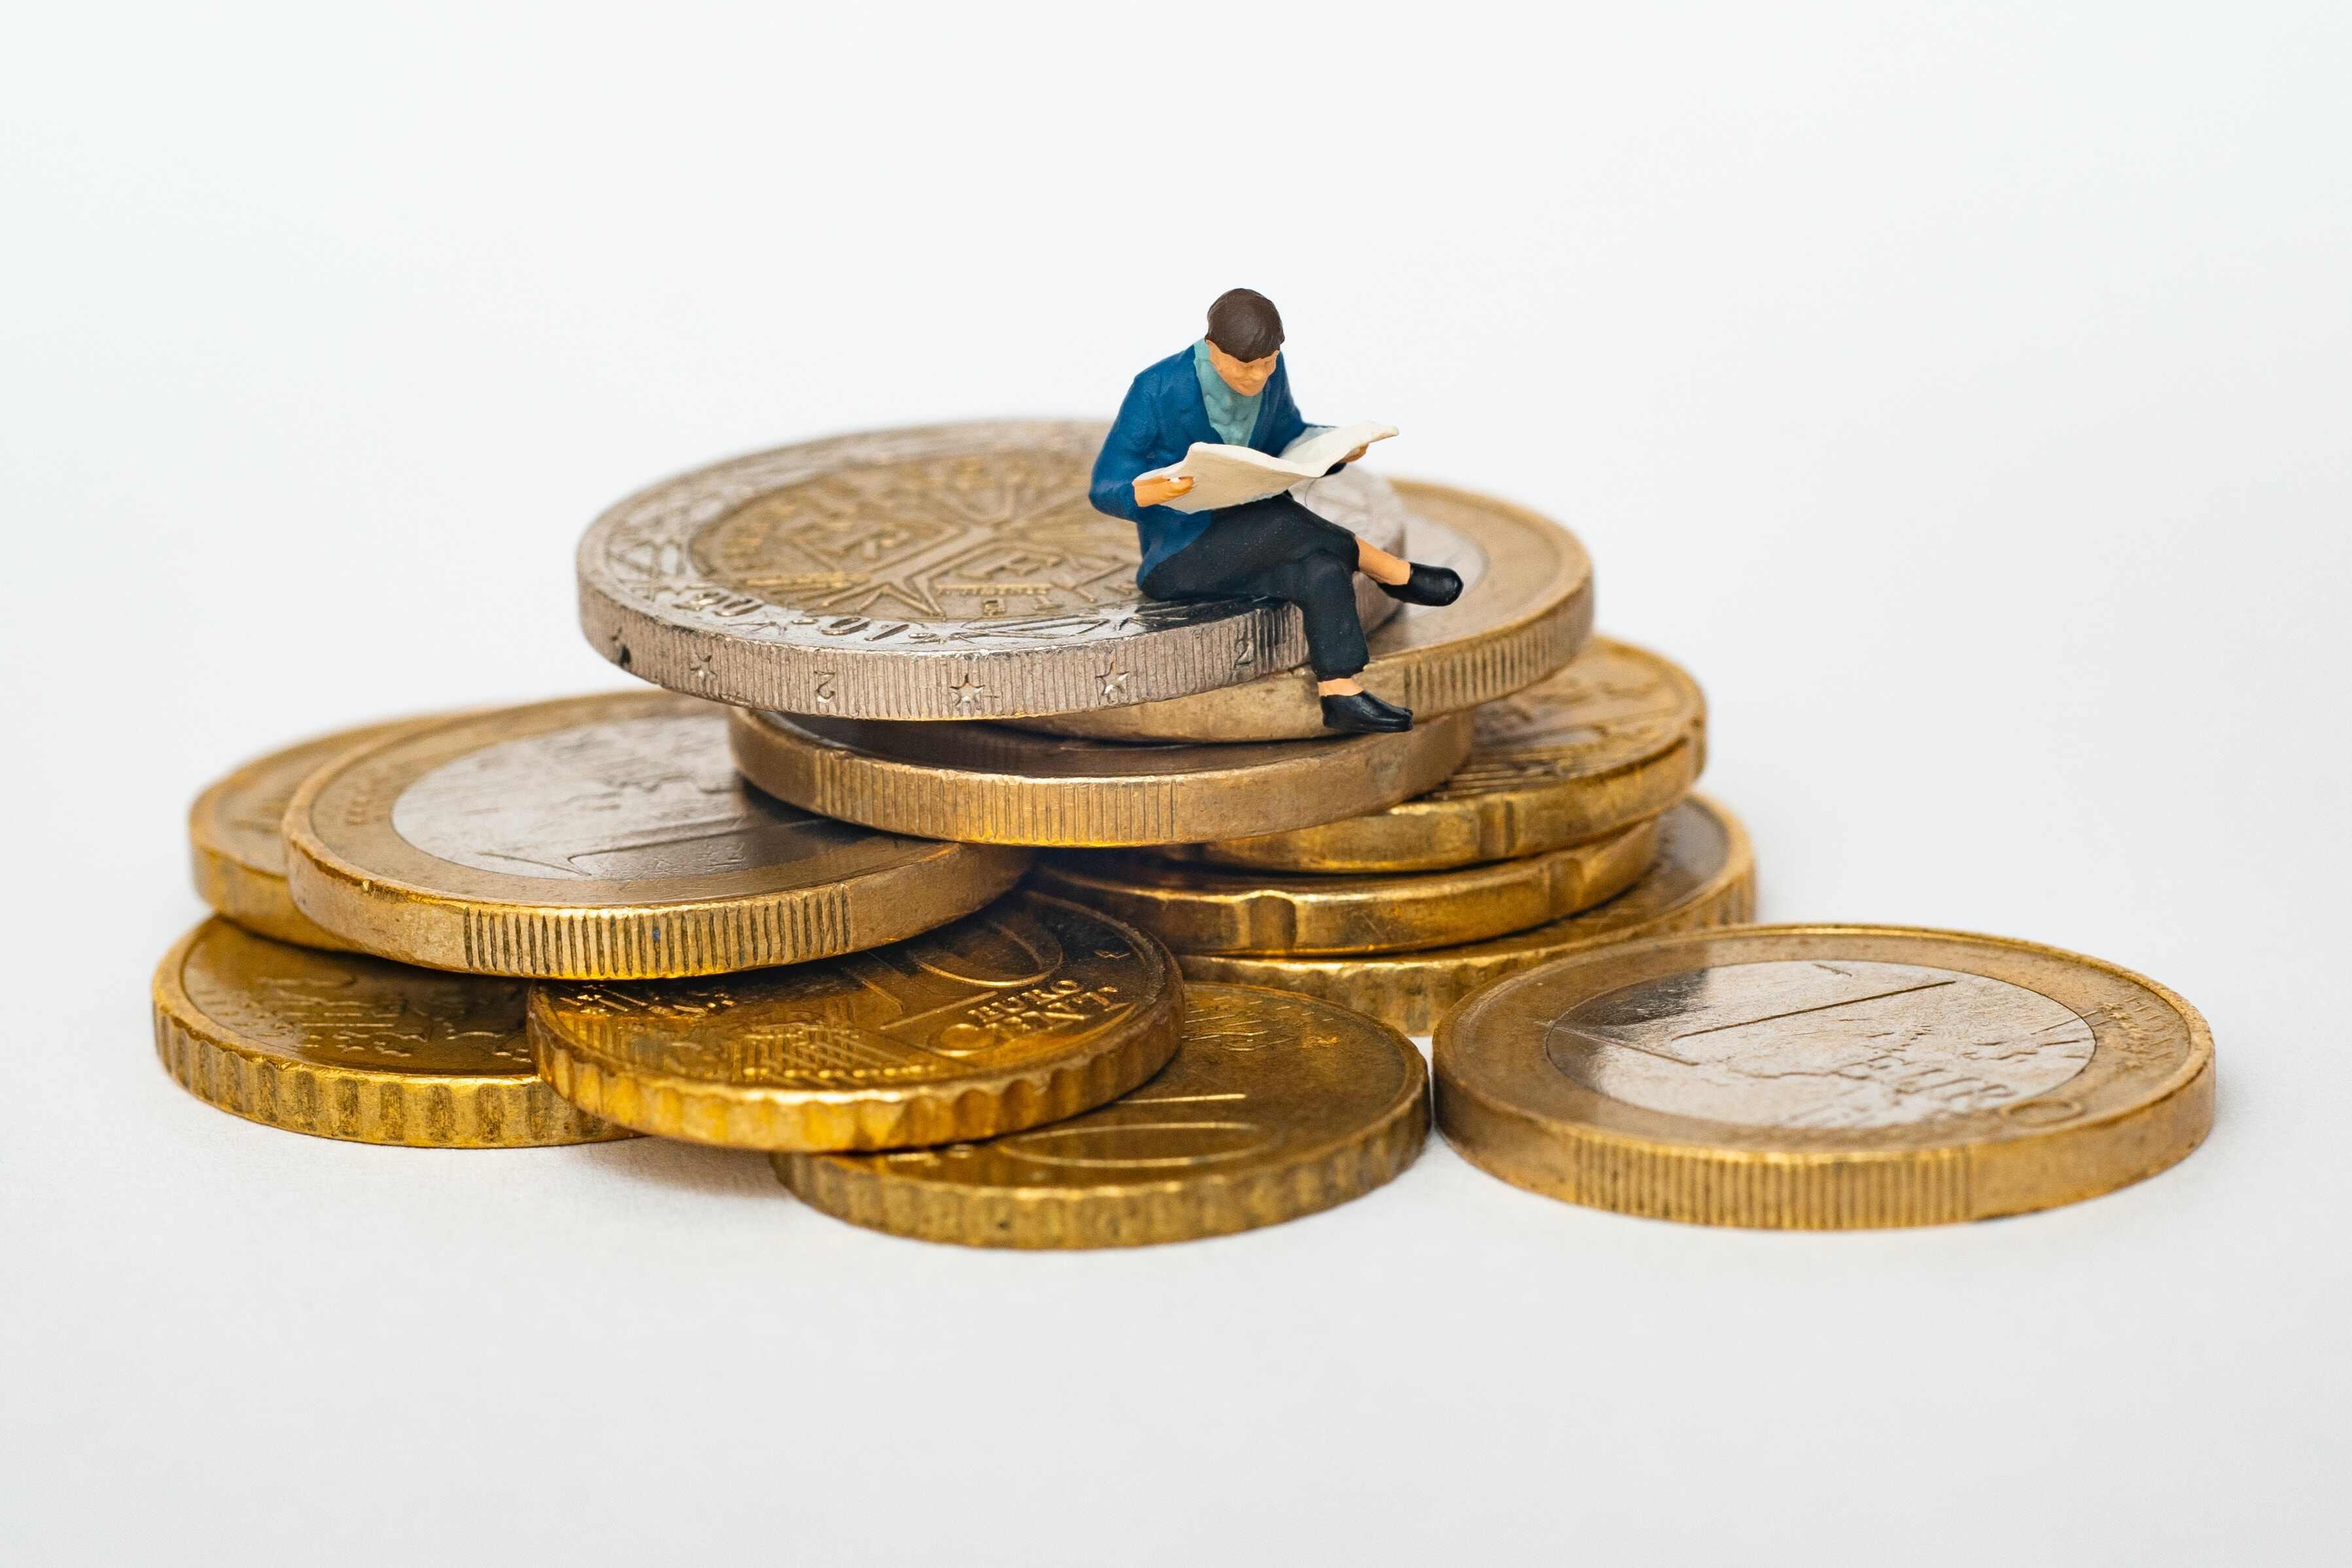 A tiny clay man in a blue jacket and brown hair reading a book sitting on a pile of eleven foreign coins with gold coatings.